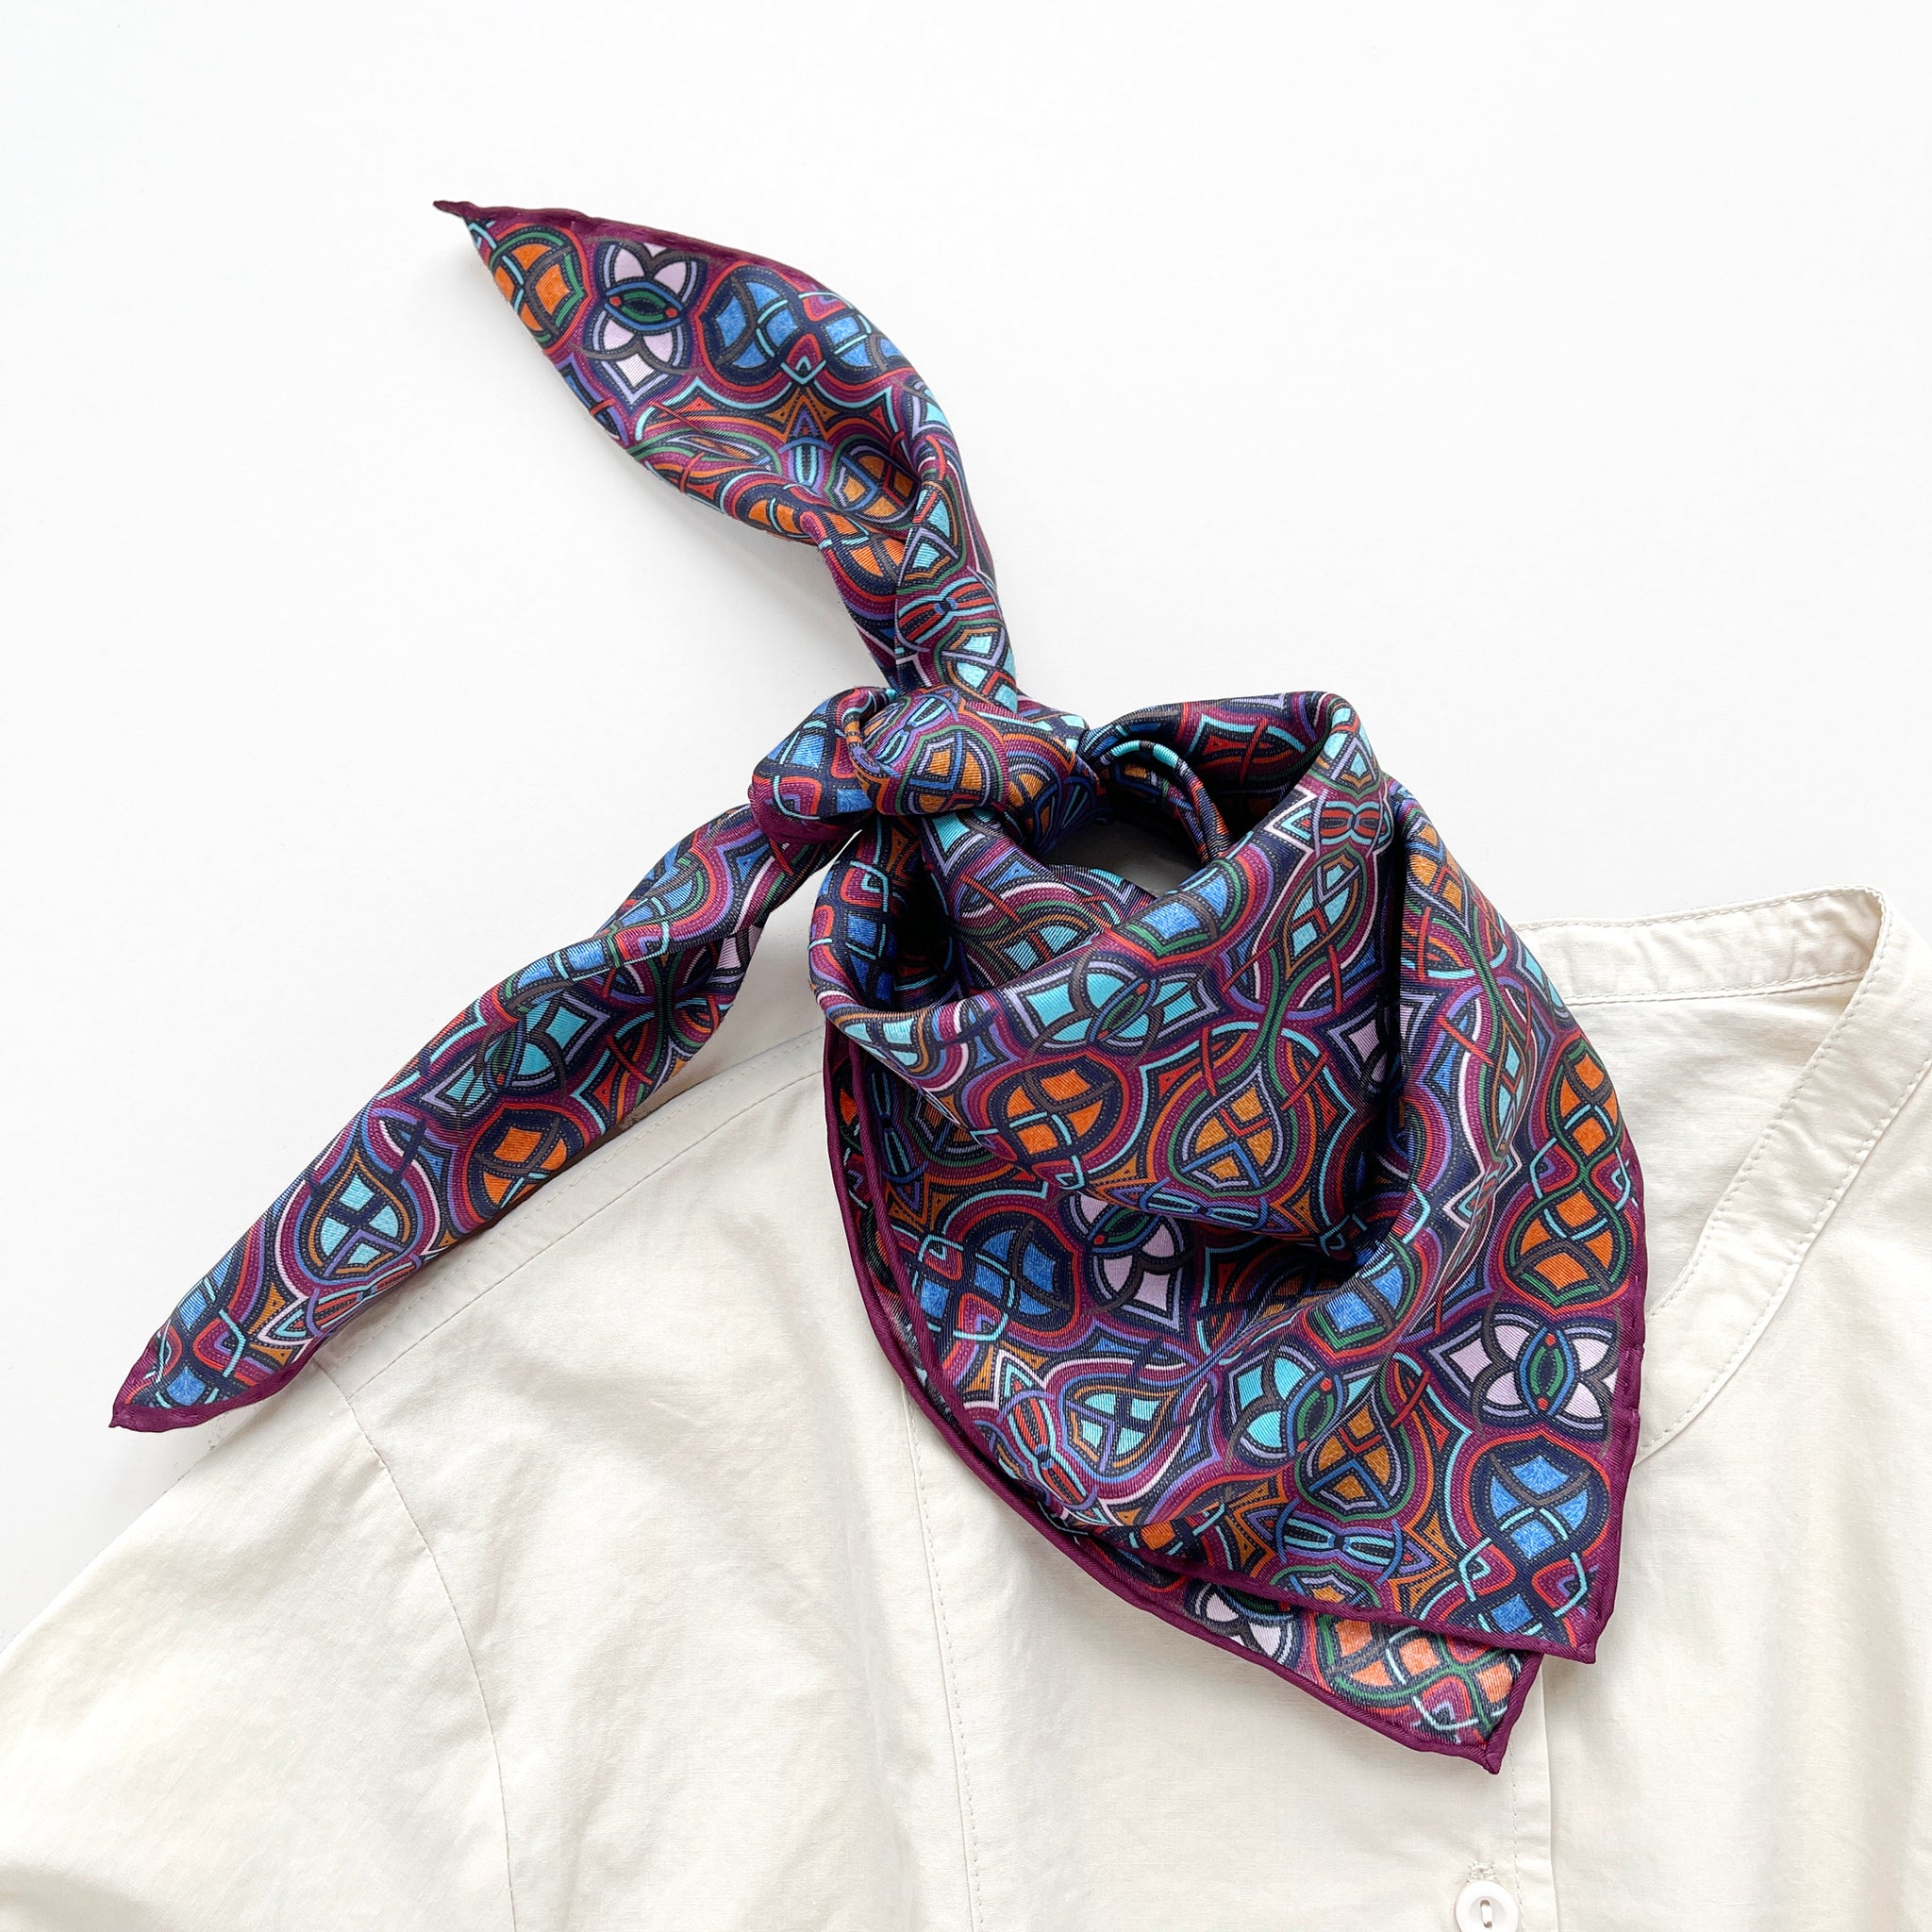 a small silk scarf neckerchief featuring an abstract intricate pattern in plum purple, blue and orange hues, tied as a bandana bib, paired with a light beige unisex shirt